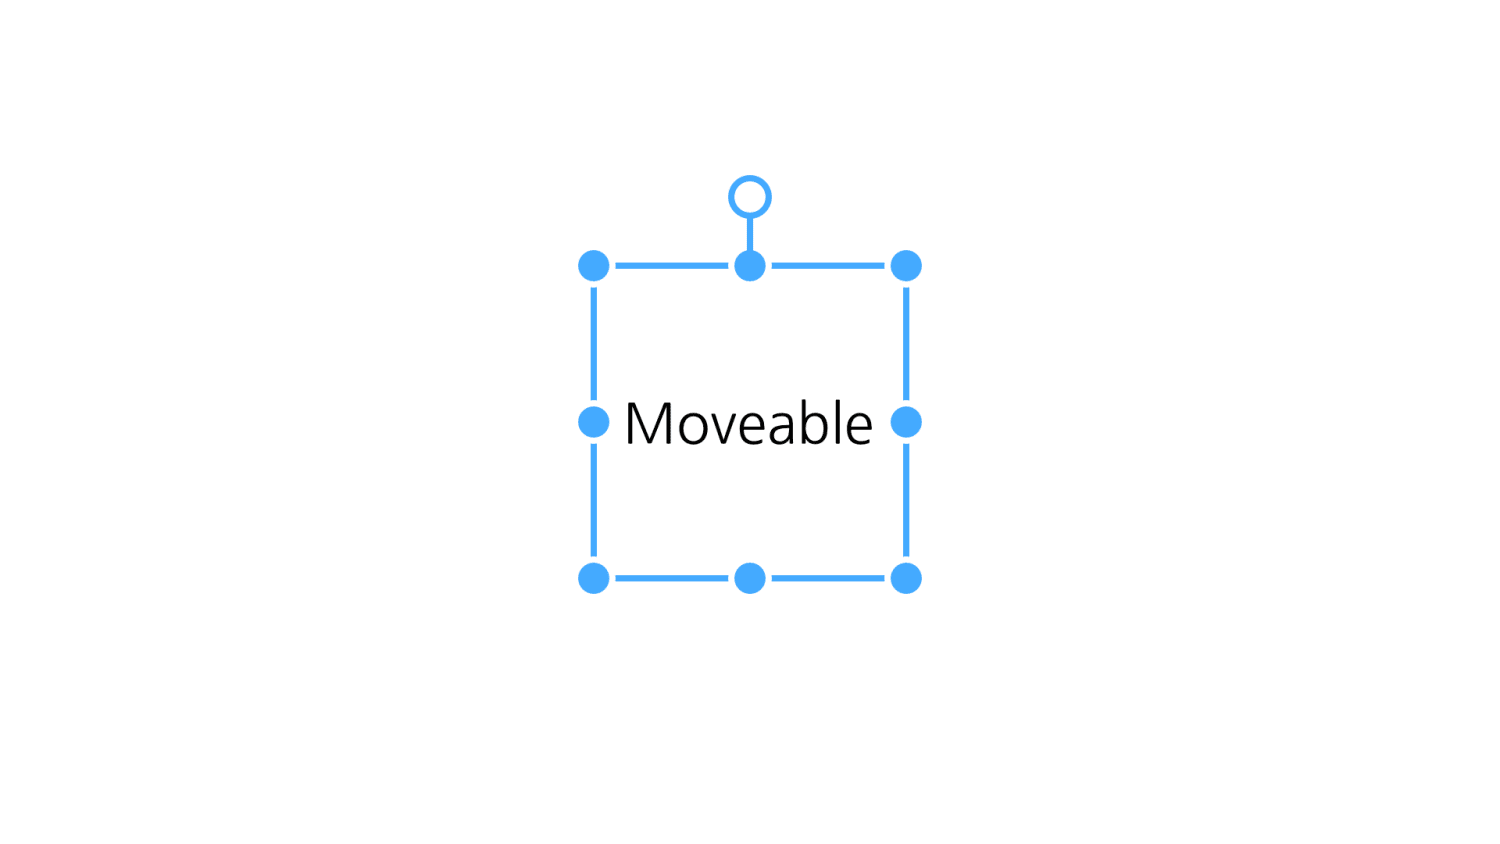 Moveable is Draggable! Resizable! Scalable! Rotatable! Warpable! Pinchable!